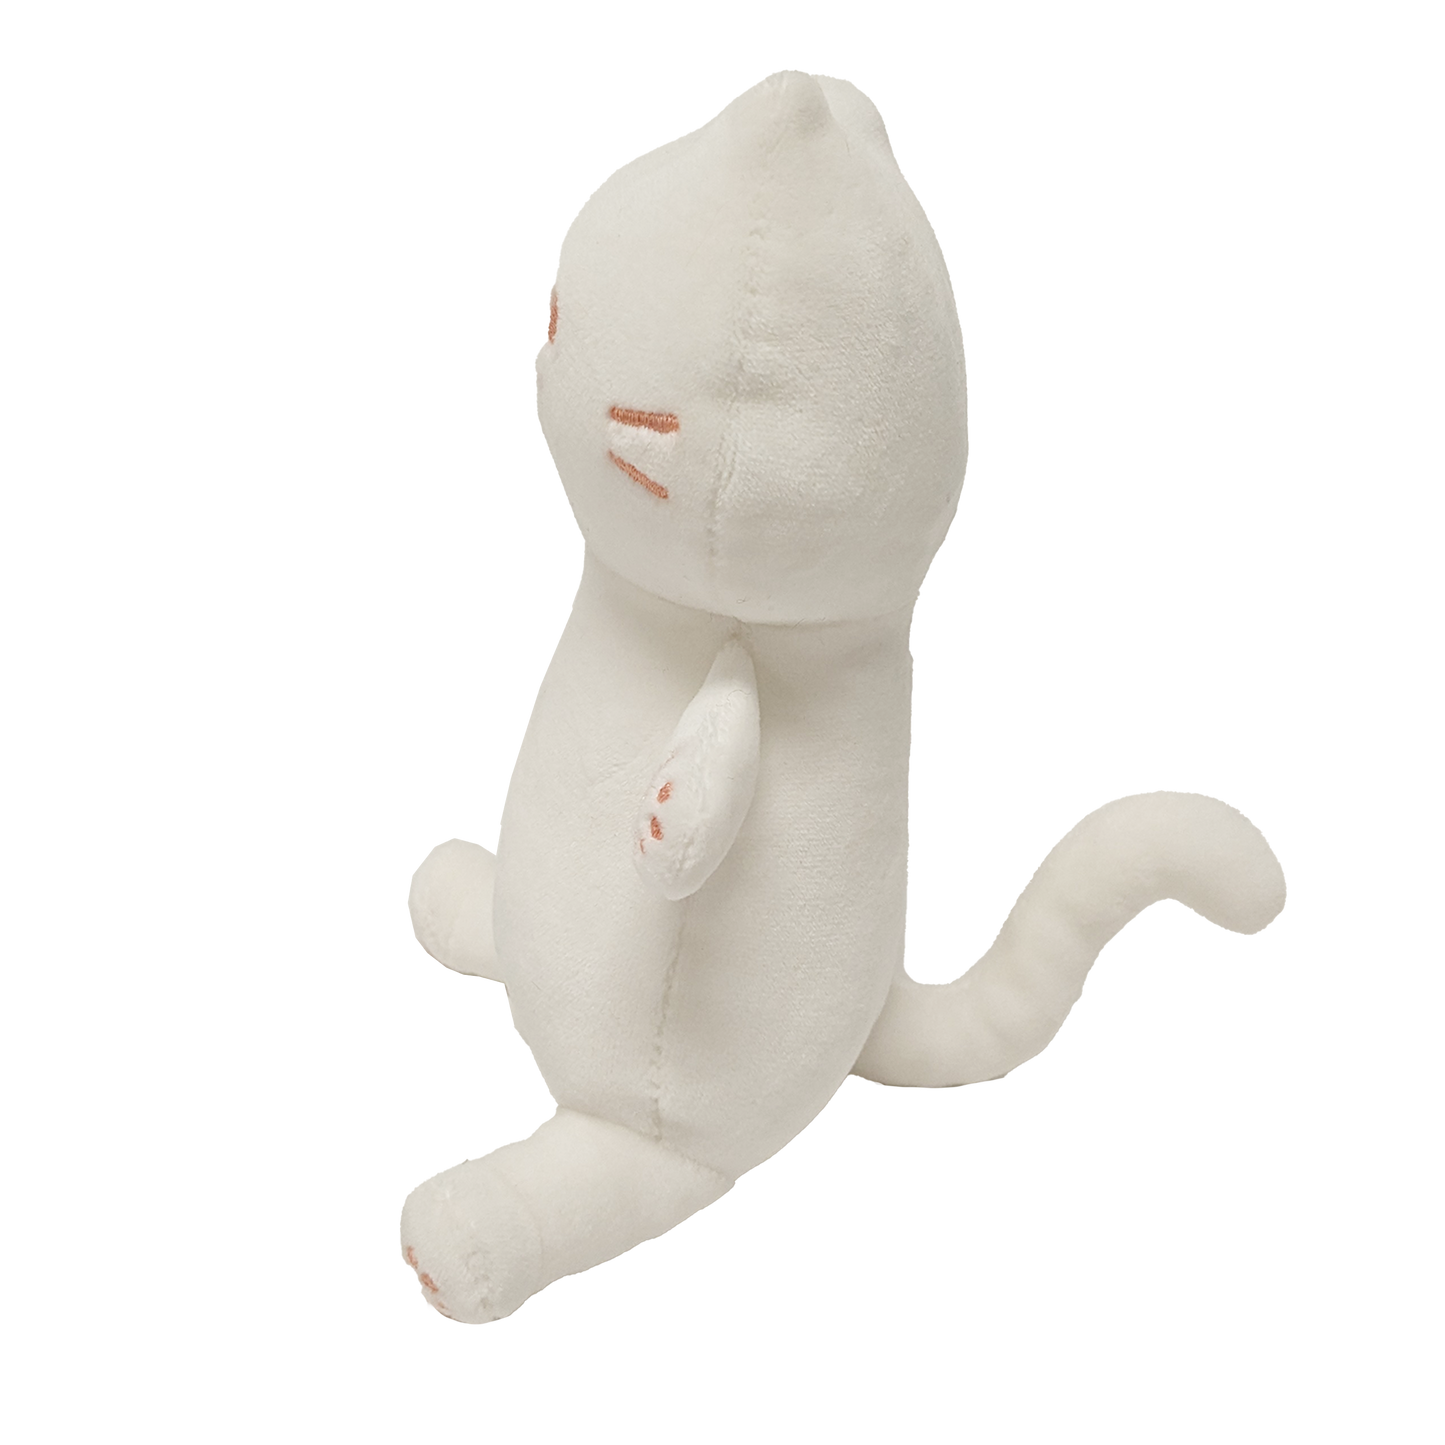 Noodlecat Plushie with Removable Hoodie - NOW IN STOCK! 🩷